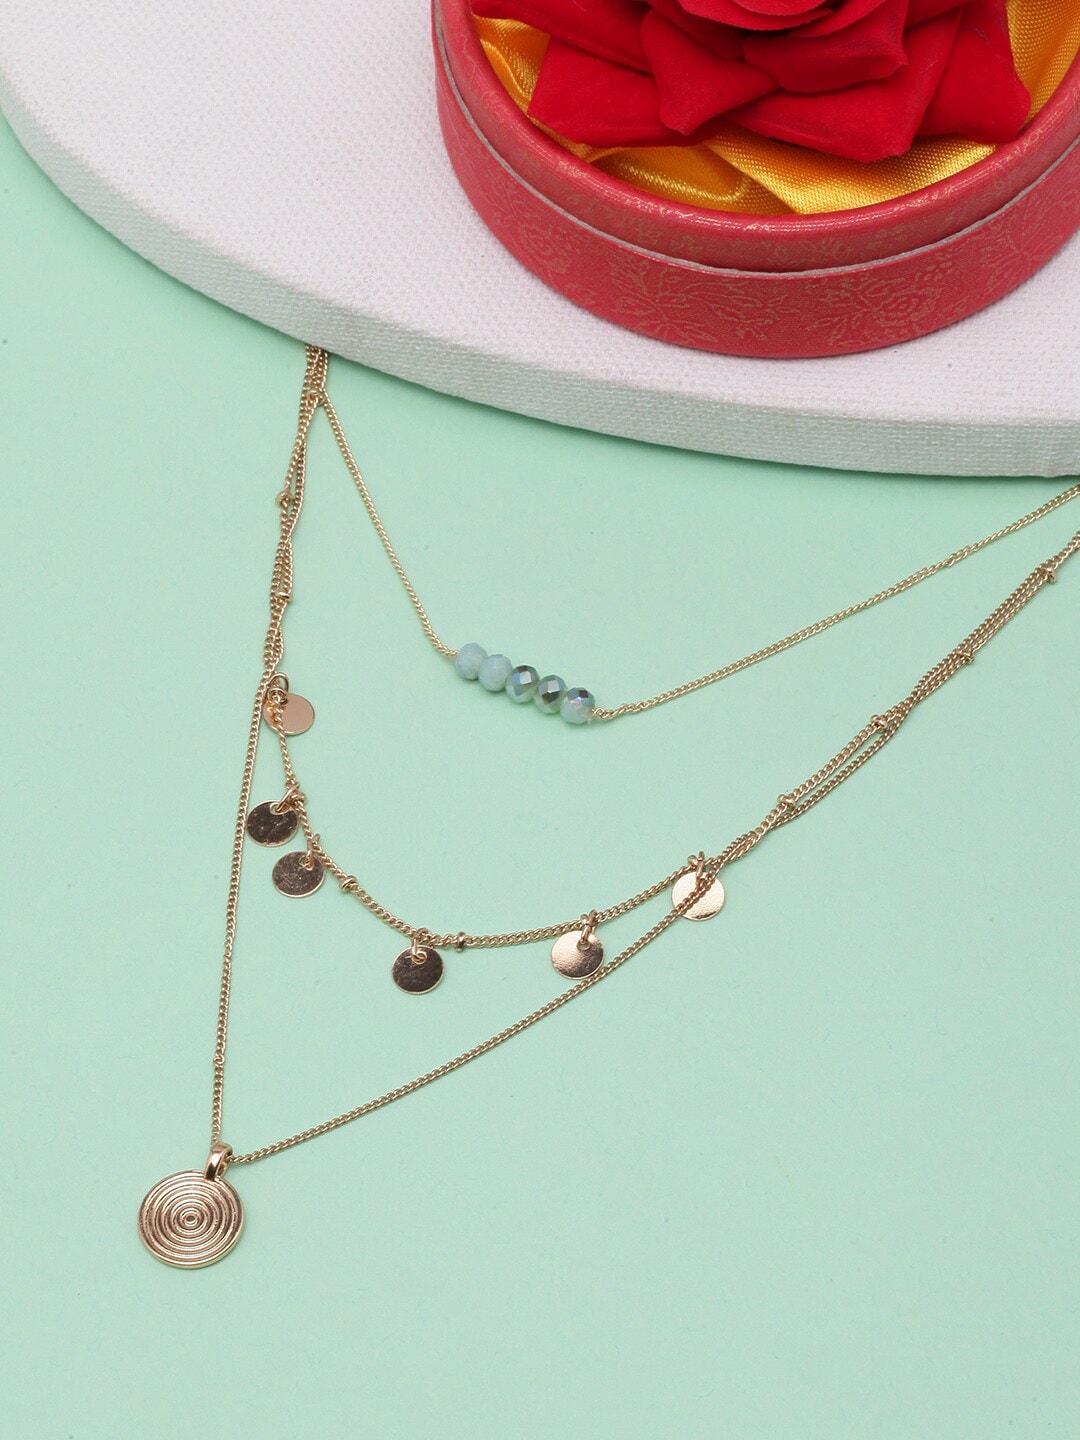 stylecast x kpop women gold necklace and chains